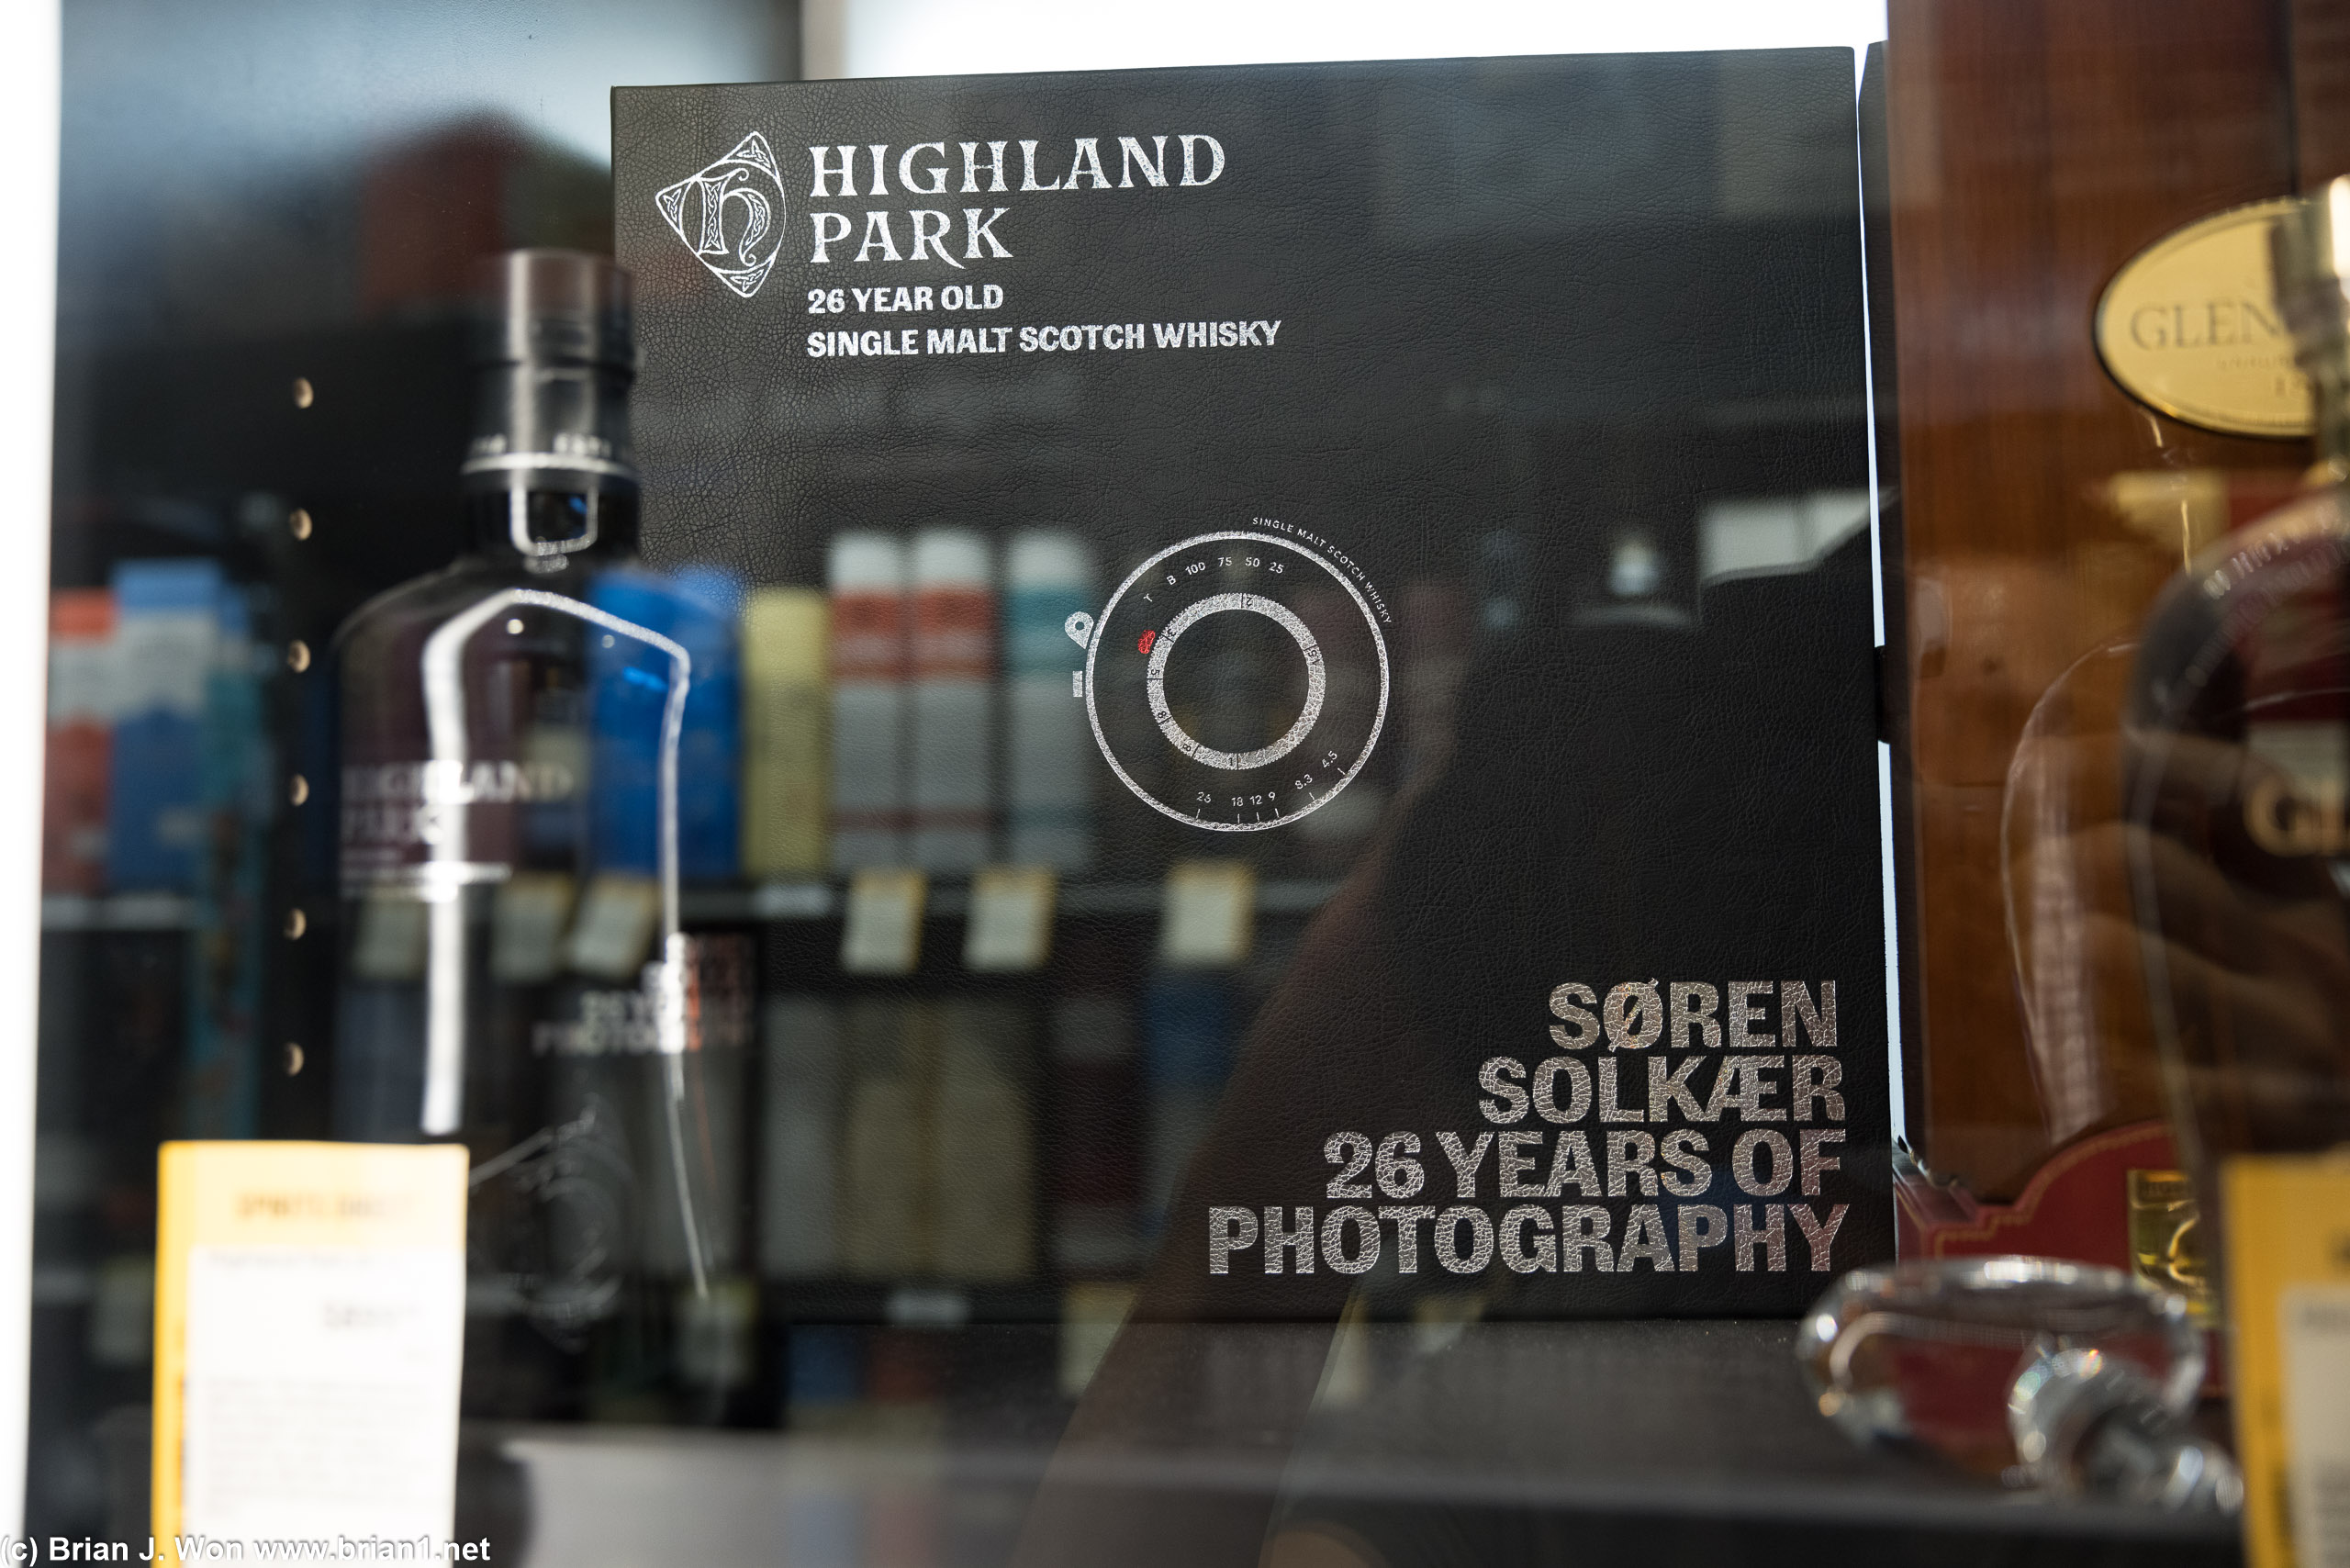 They have one of the photography-series scotch from Highland Park at the local Total Wine.